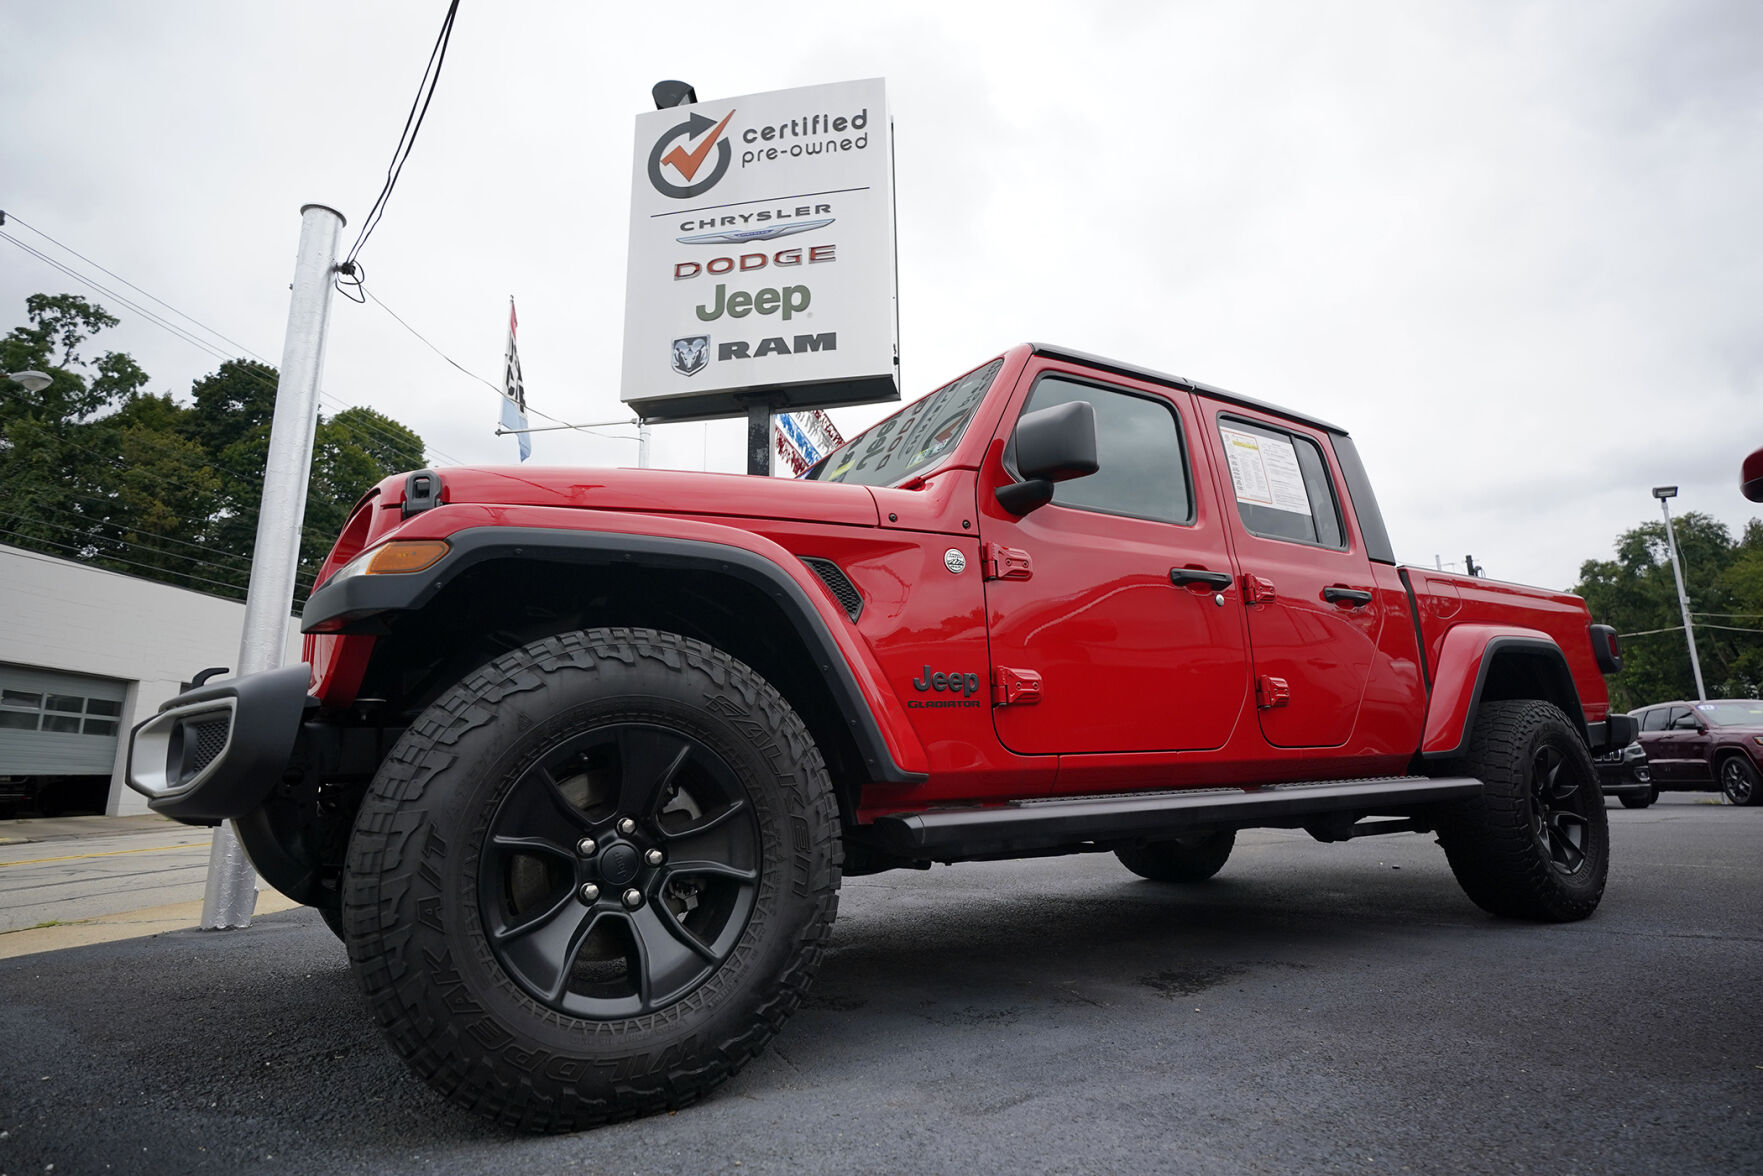 <p>File - A used 2020 Jeep is on display on a lot in Pittsburgh, Thursday, Sept. 29, 2022. Price increases moderated in the United States last month, Thursday, Nov. 10, in the latest sign that the inflation pressures that have gripped the nation might be easing as the economy slows and consumers grow more cautious. (AP Photo/Gene J. Puskar, File)</p>   PHOTO CREDIT: Gene J. Puskar - staff, AP